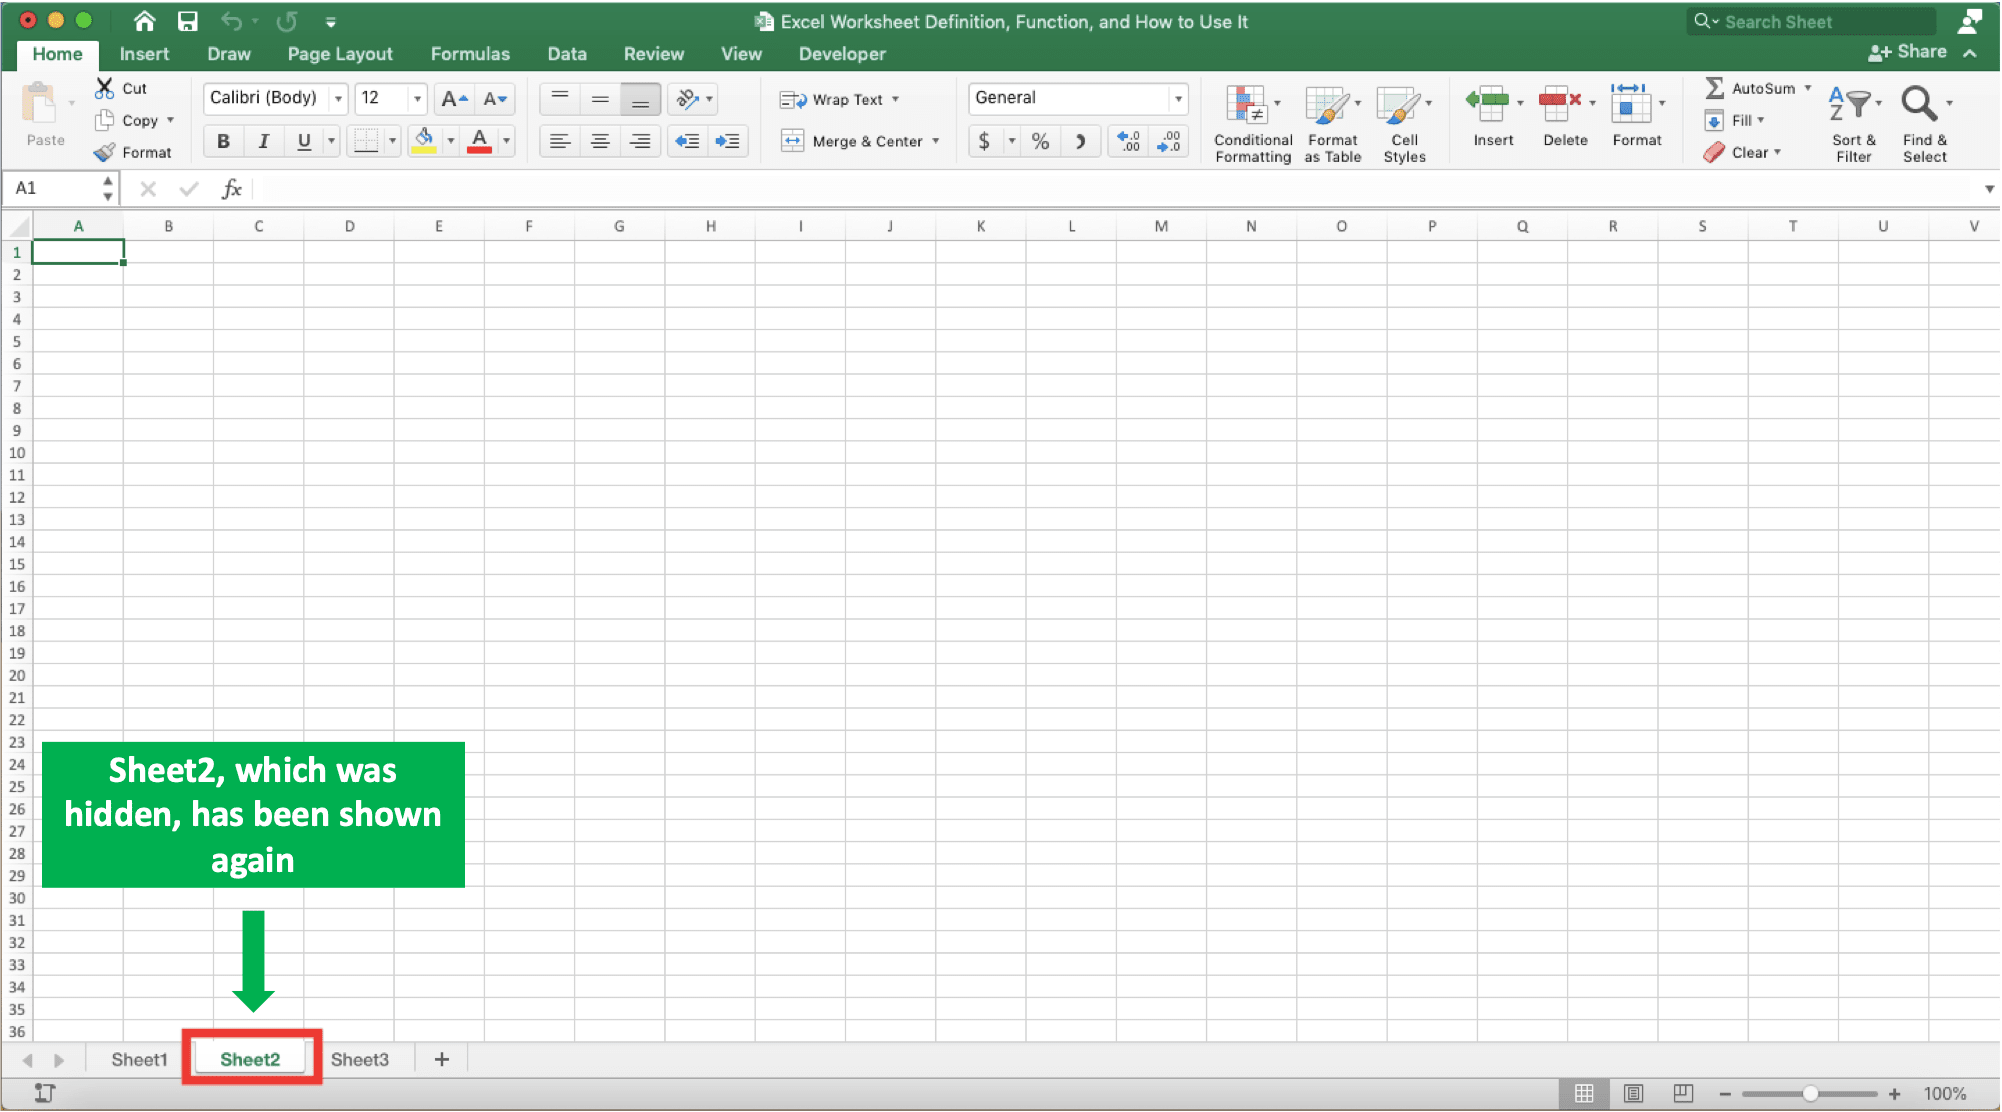 Excel Worksheet Definition, Function, and How to Use It - Screenshot of the Unhide Sheets Result Example in Excel